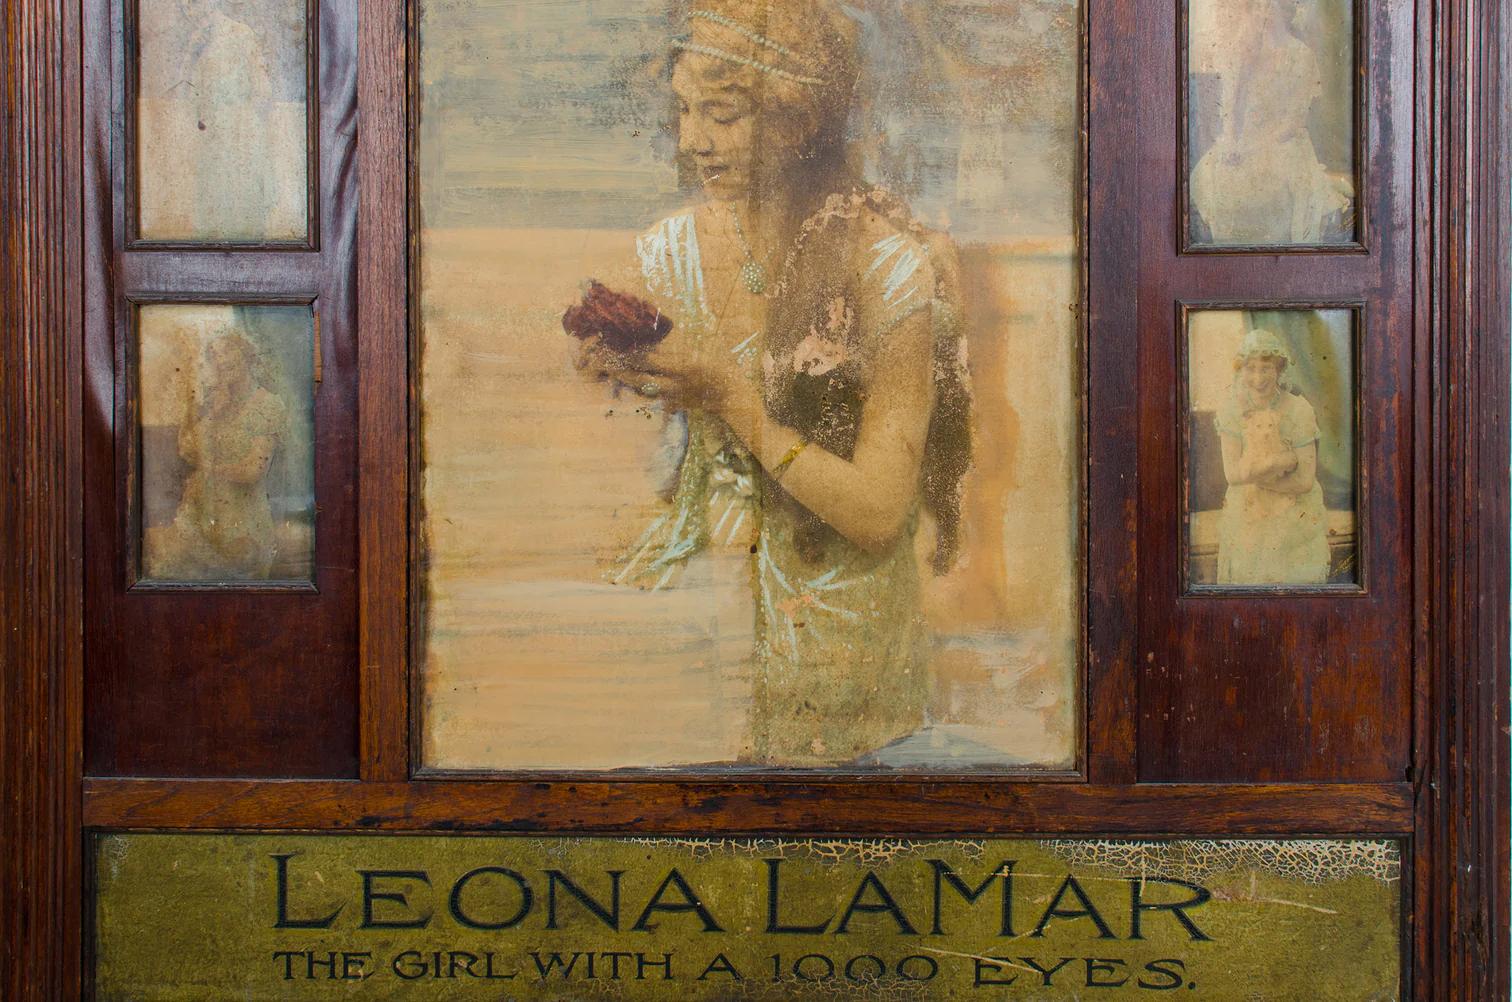 Other Leona LaMar “The Girl With a 1000 Eyes” Vaudeville Mentalist Lobby Marquee